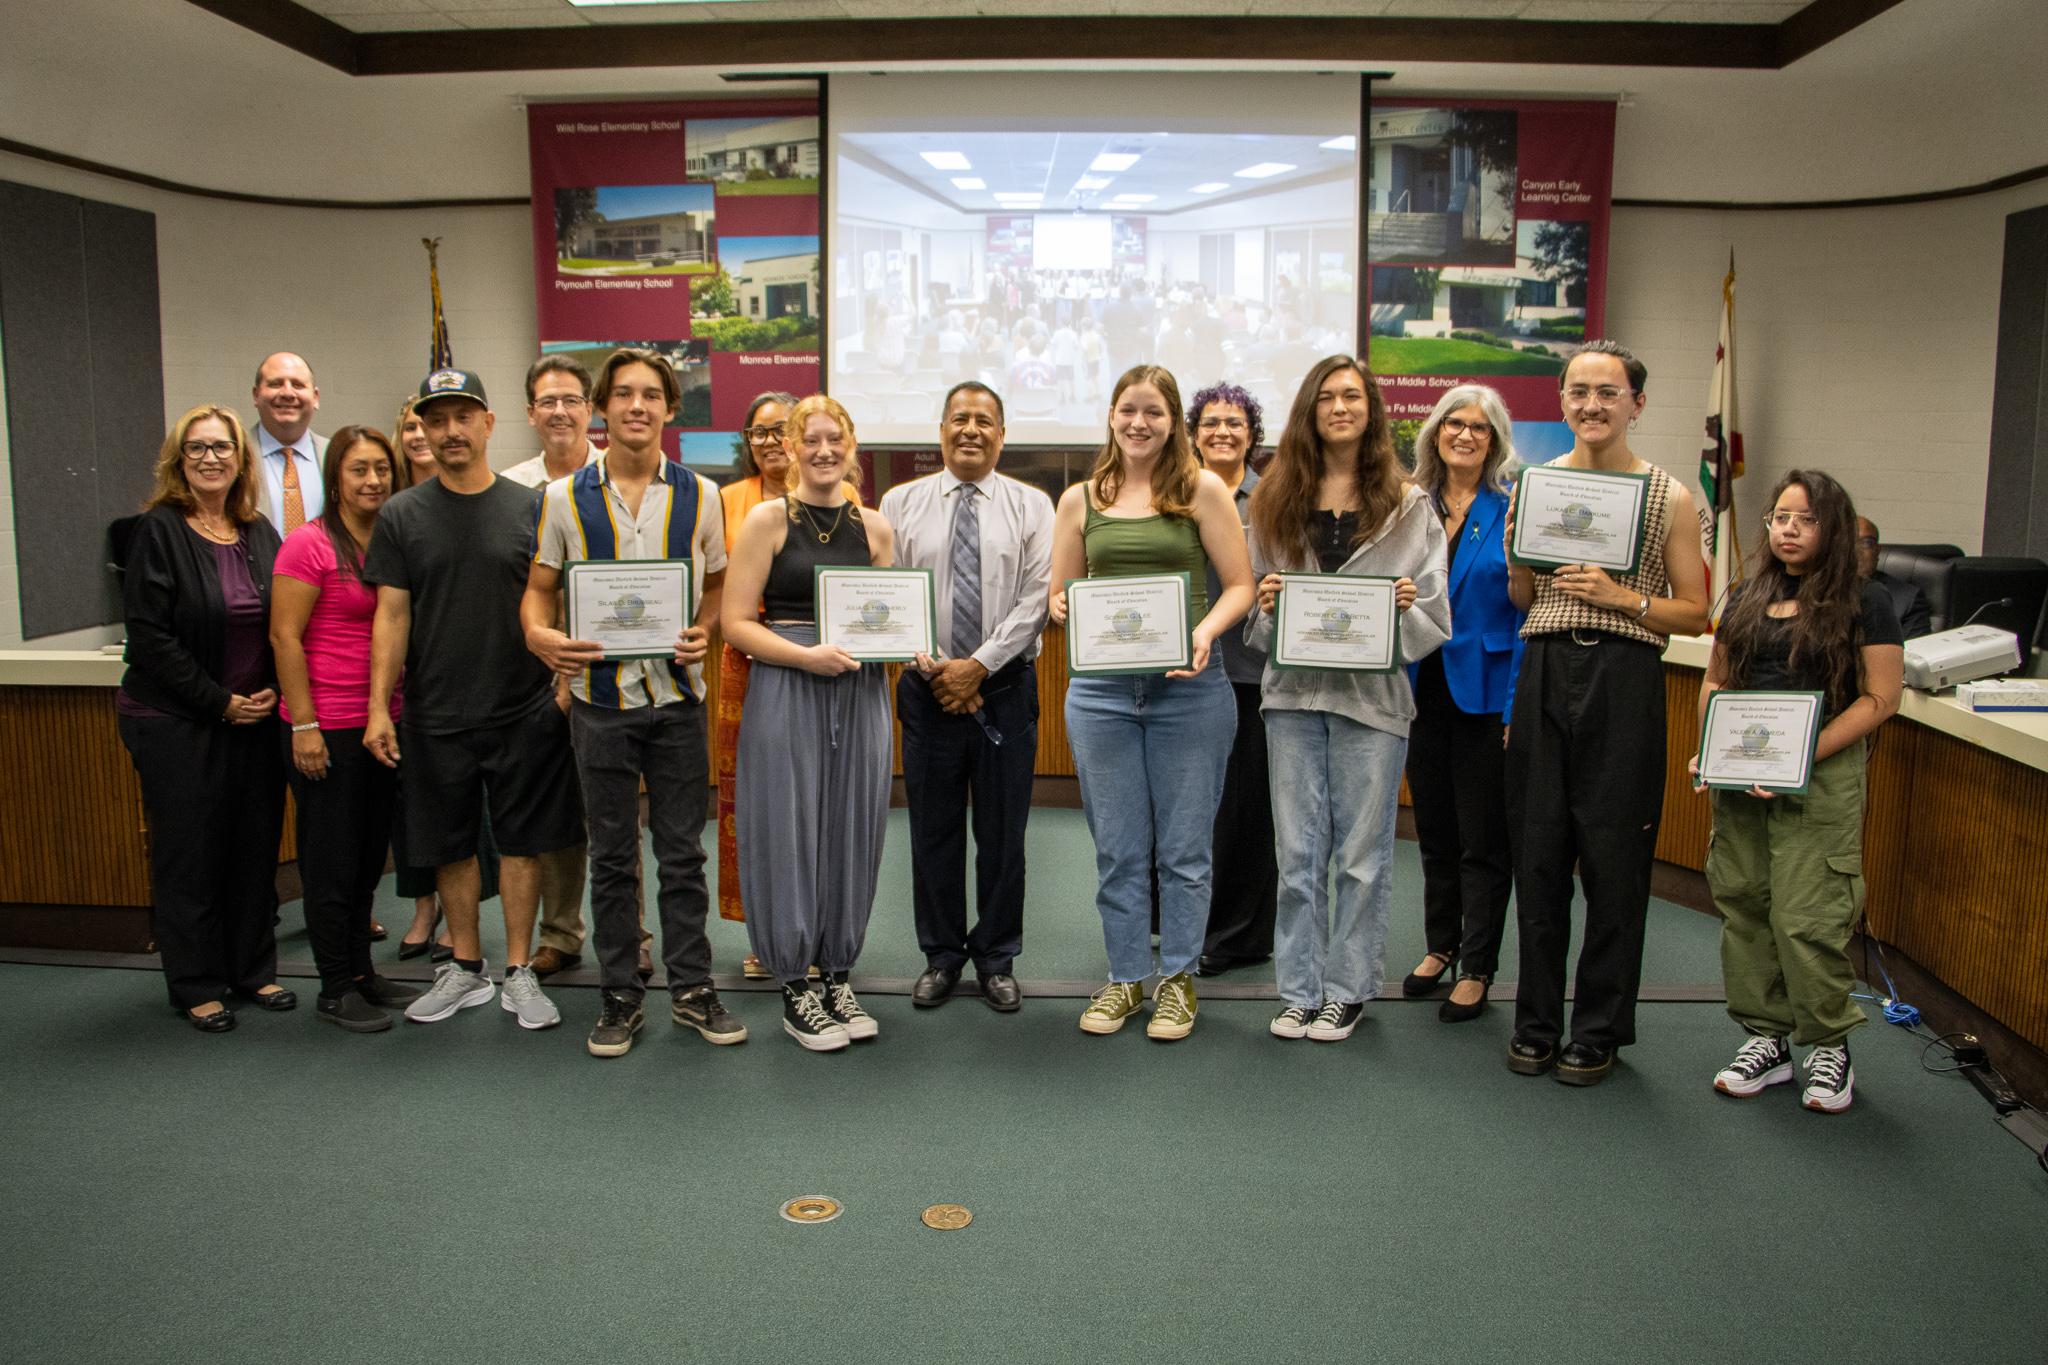 More than a dozen Monrovia High School students were celebrated for their excellent Advanced Placement(AP) test grades.